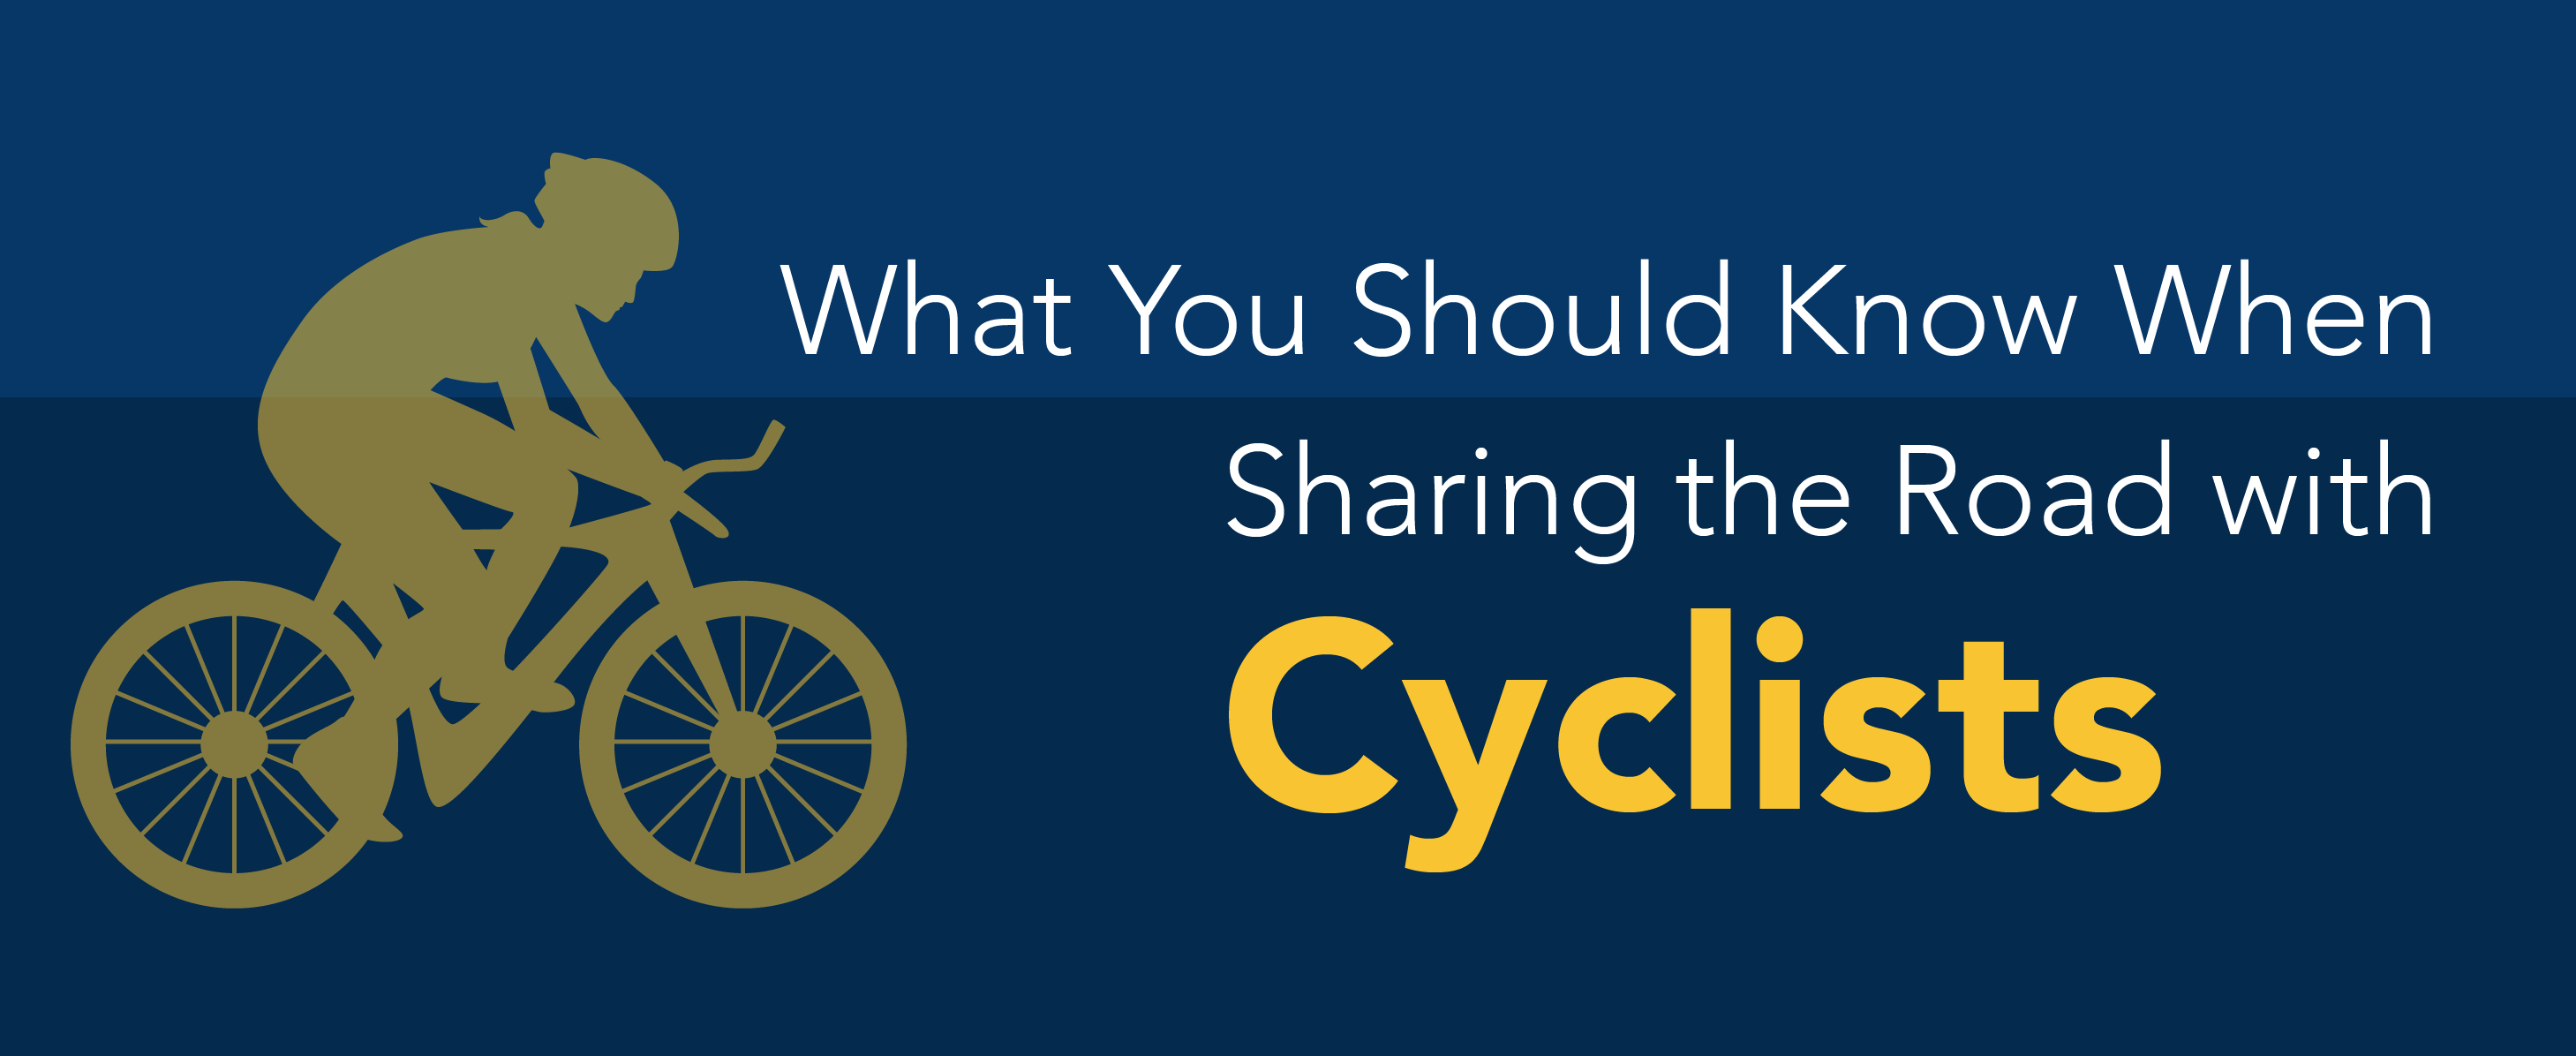 What you should know when sharing the road with cyclists